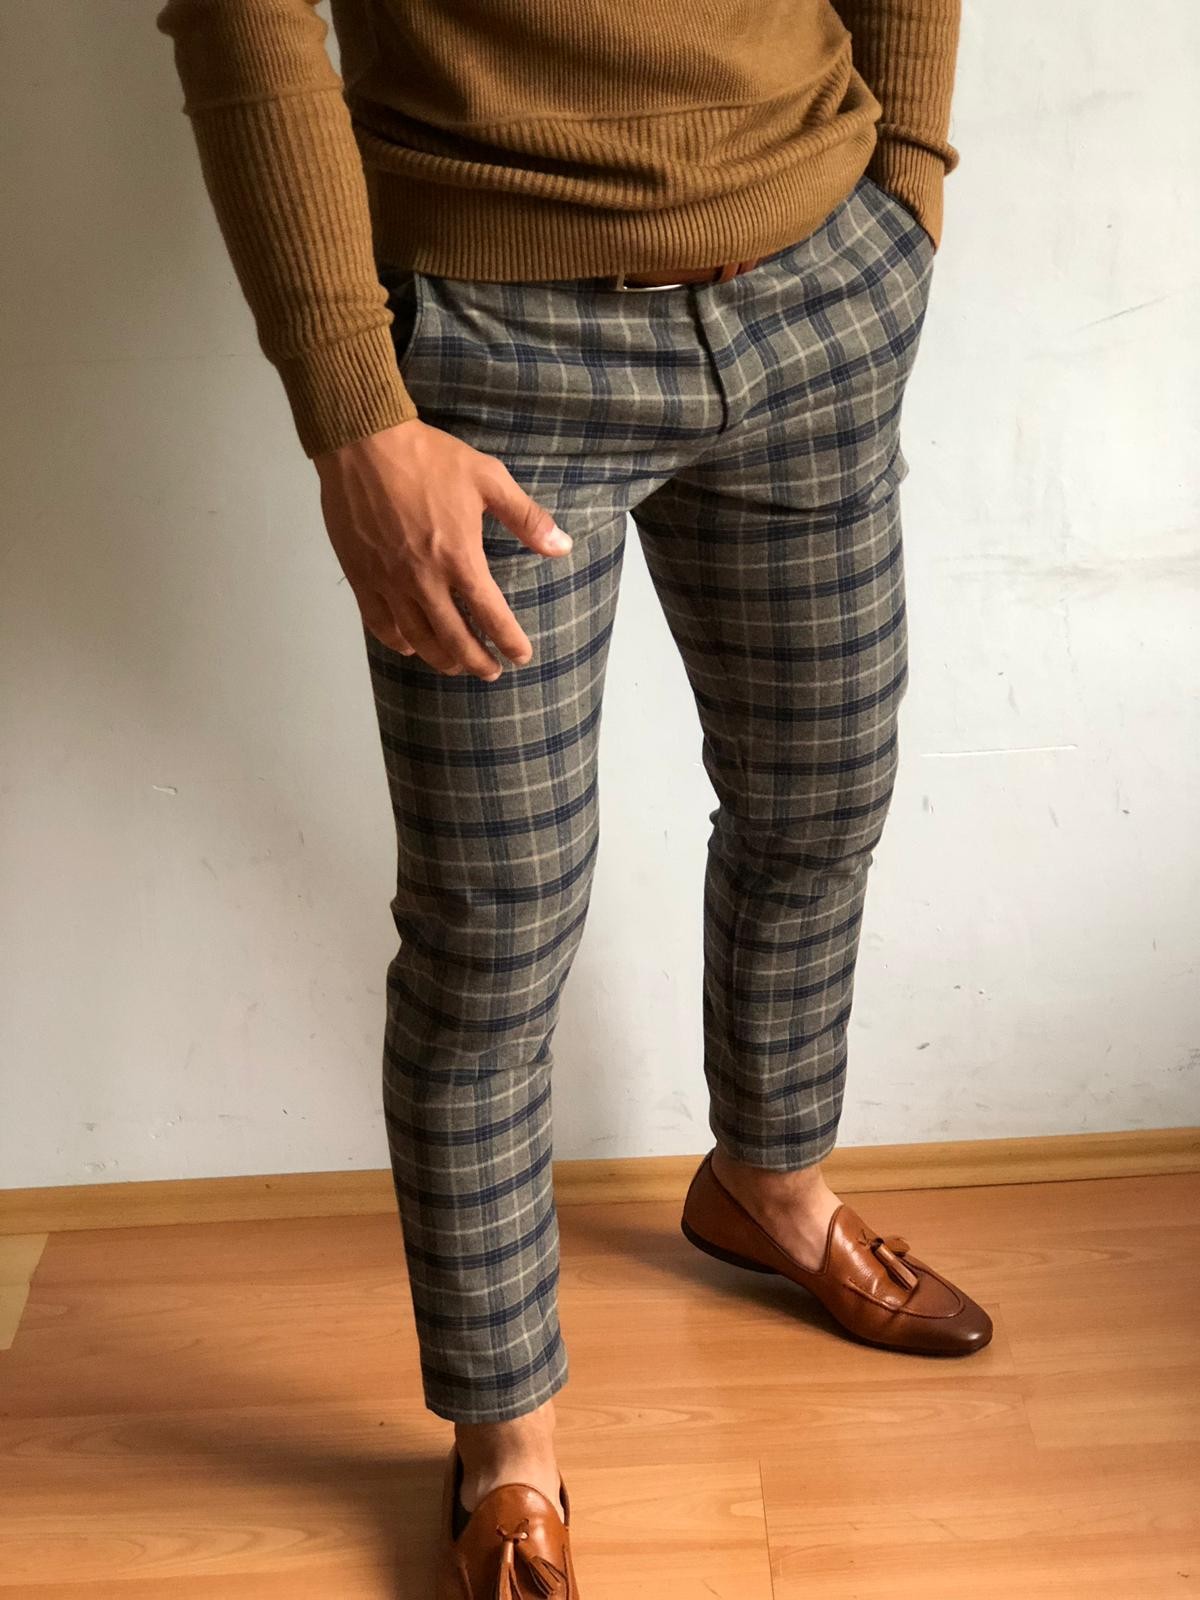 Buy Camel Slim Fit Plaid Pants by Gentwith.com with Free Shipping